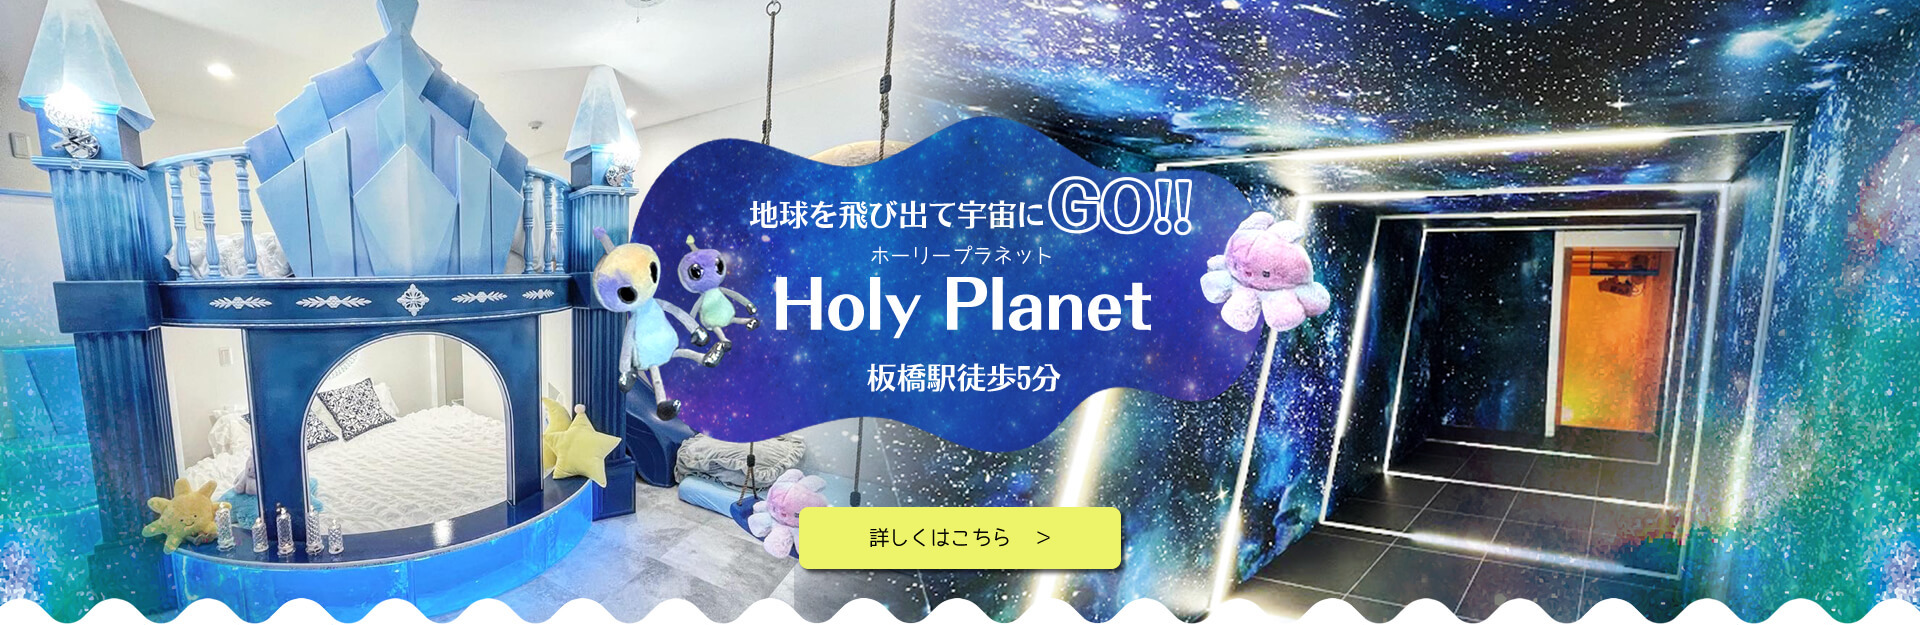 Holy Planet